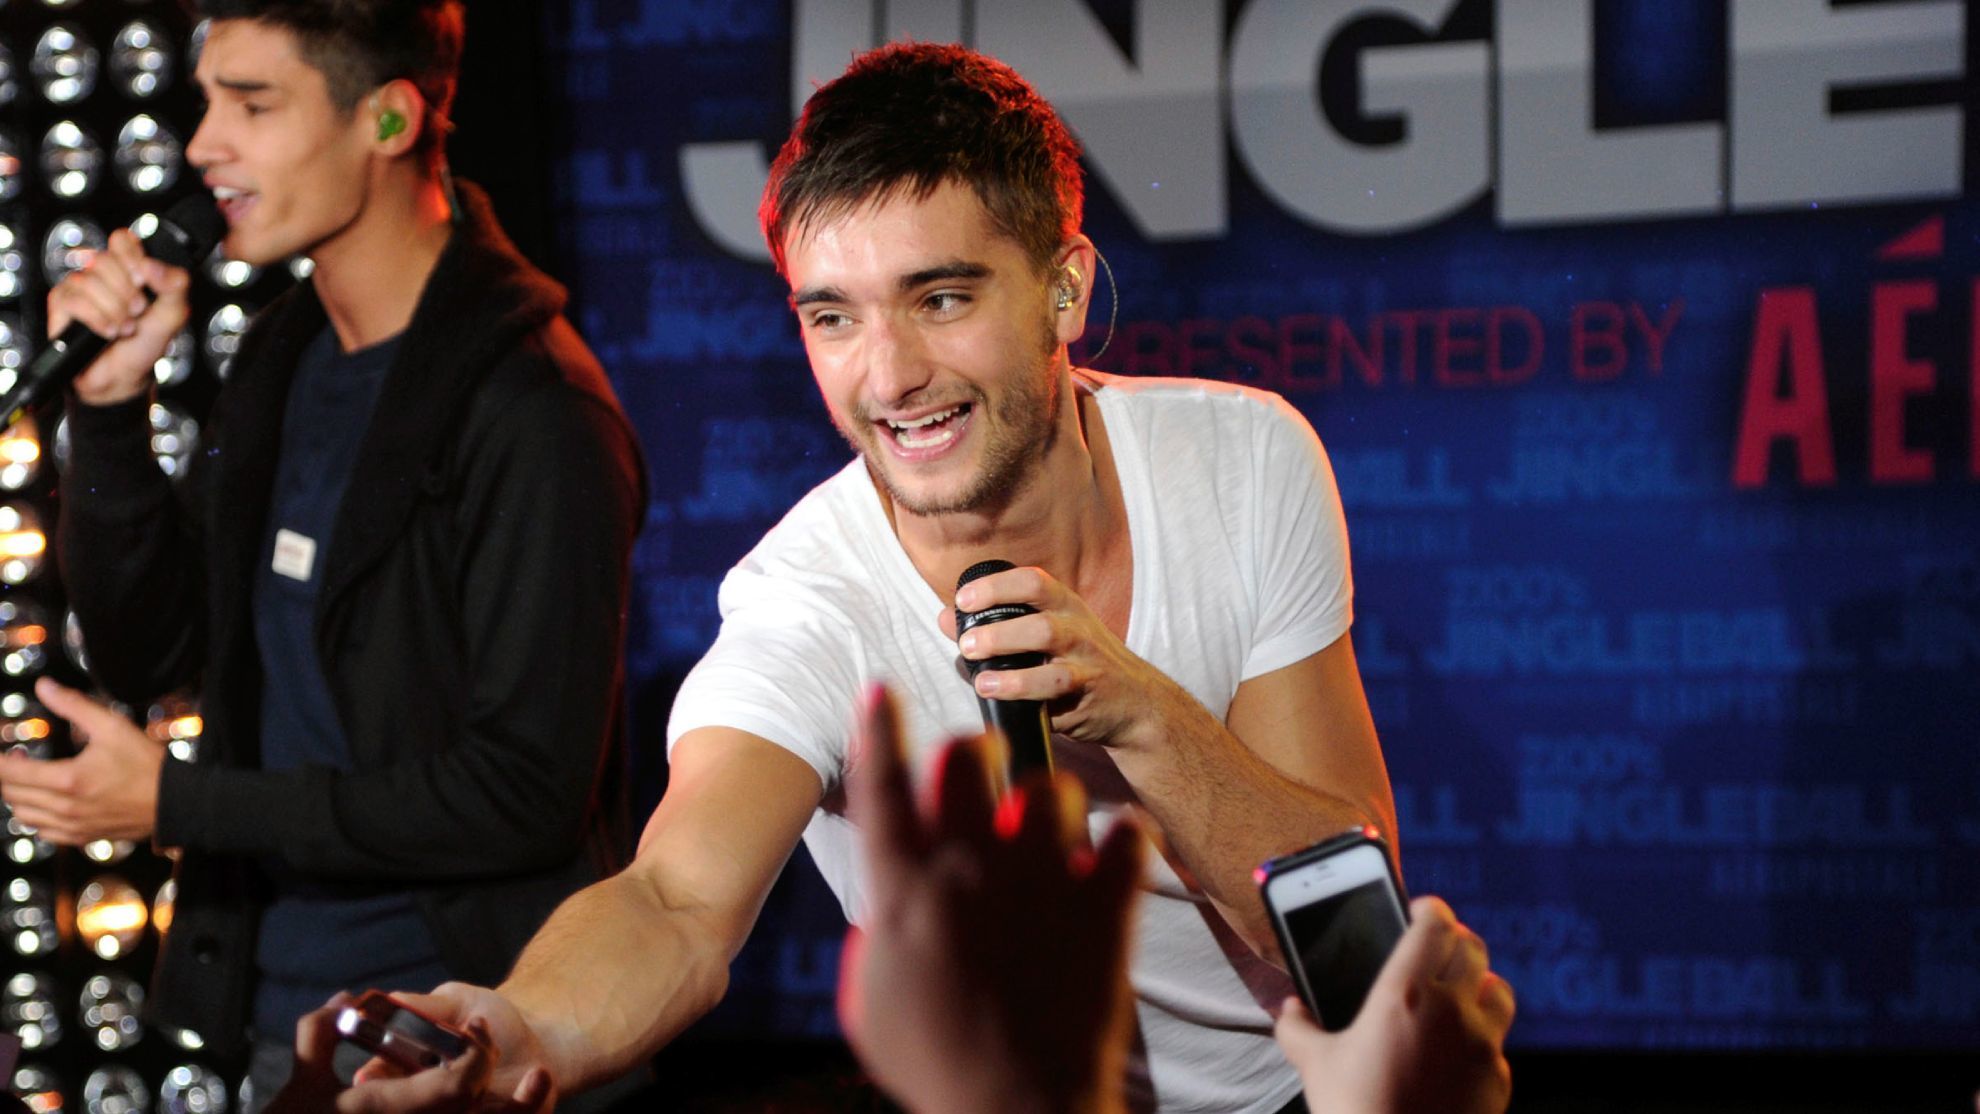 The Wanted singer Tom Parker.